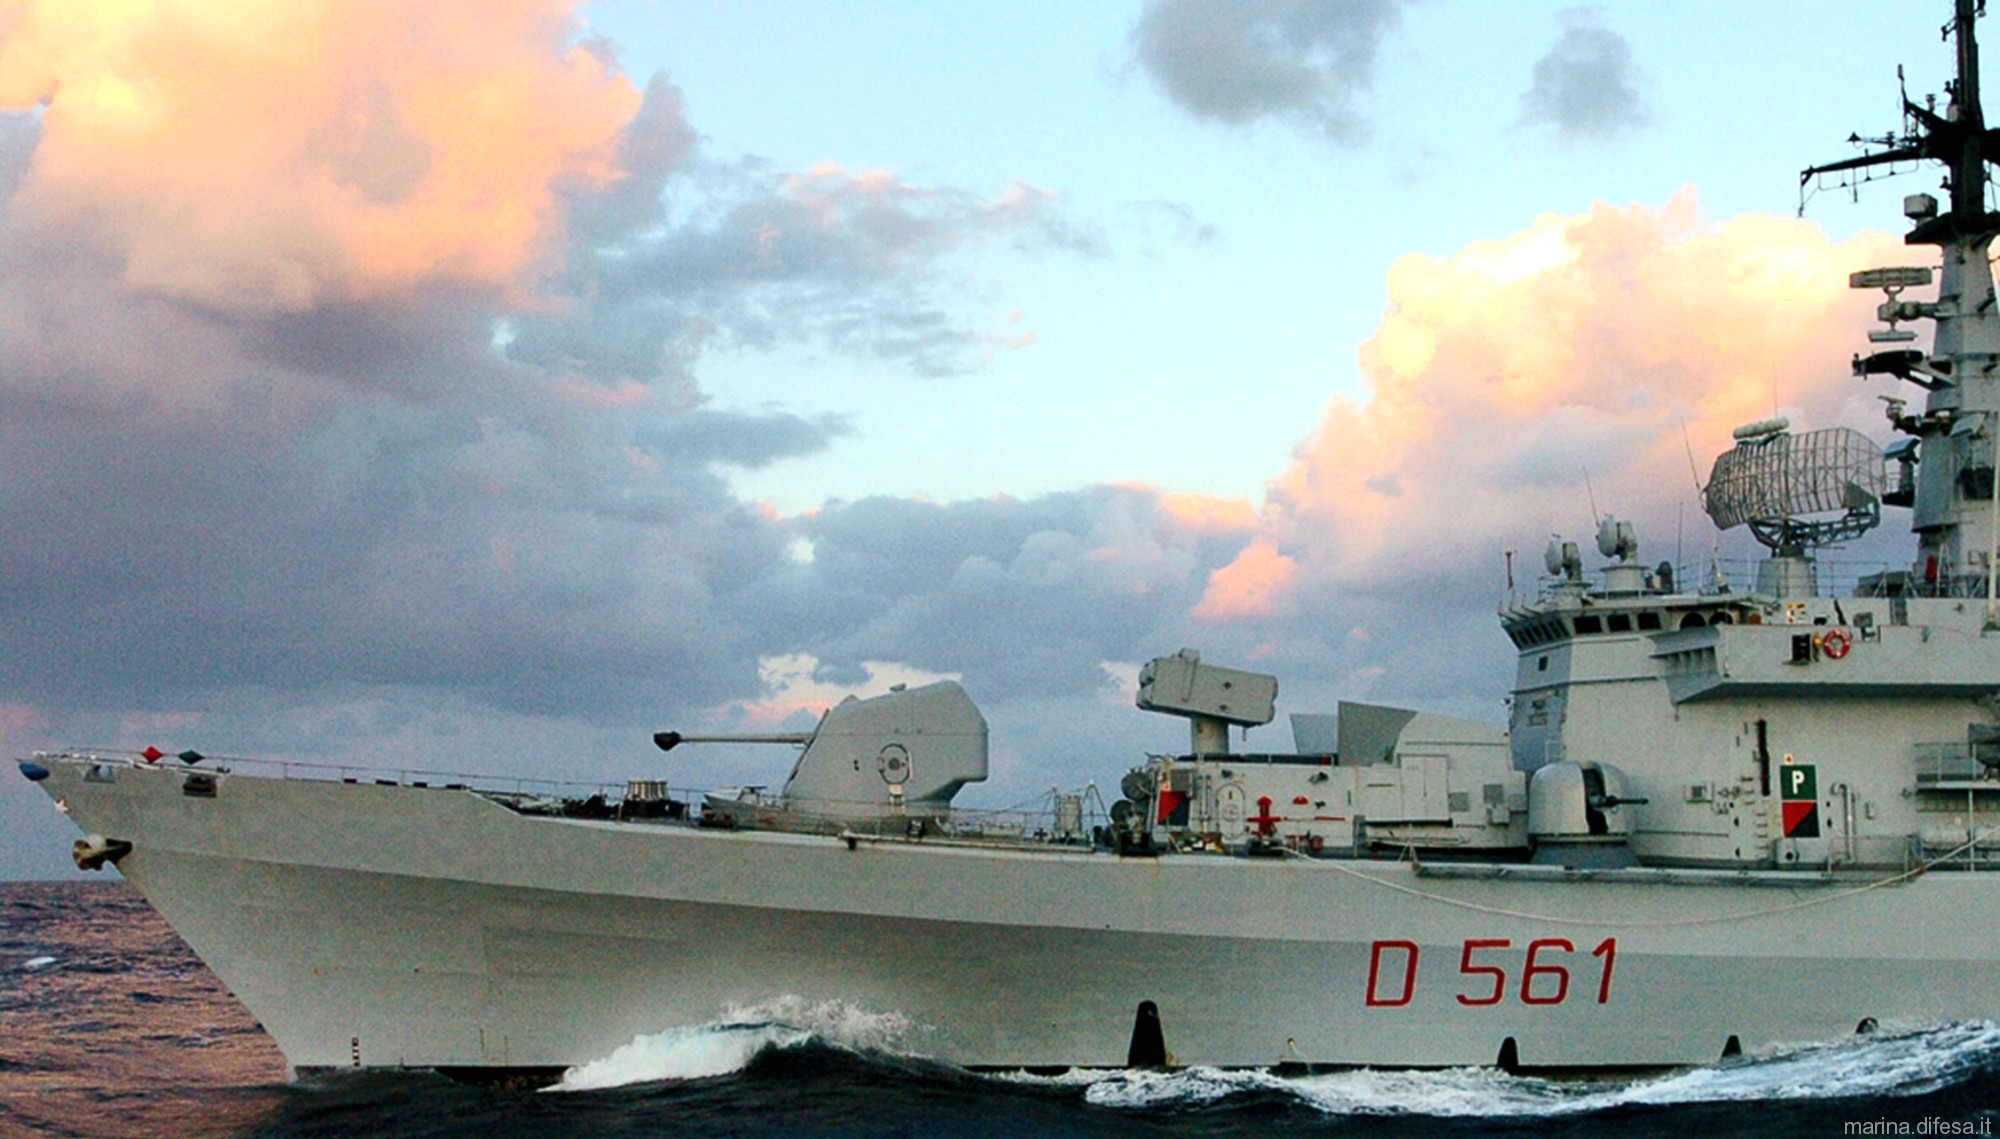 d-561 francesco mimbelli its nave guided missile destroyer ddg italian navy marina militare 06